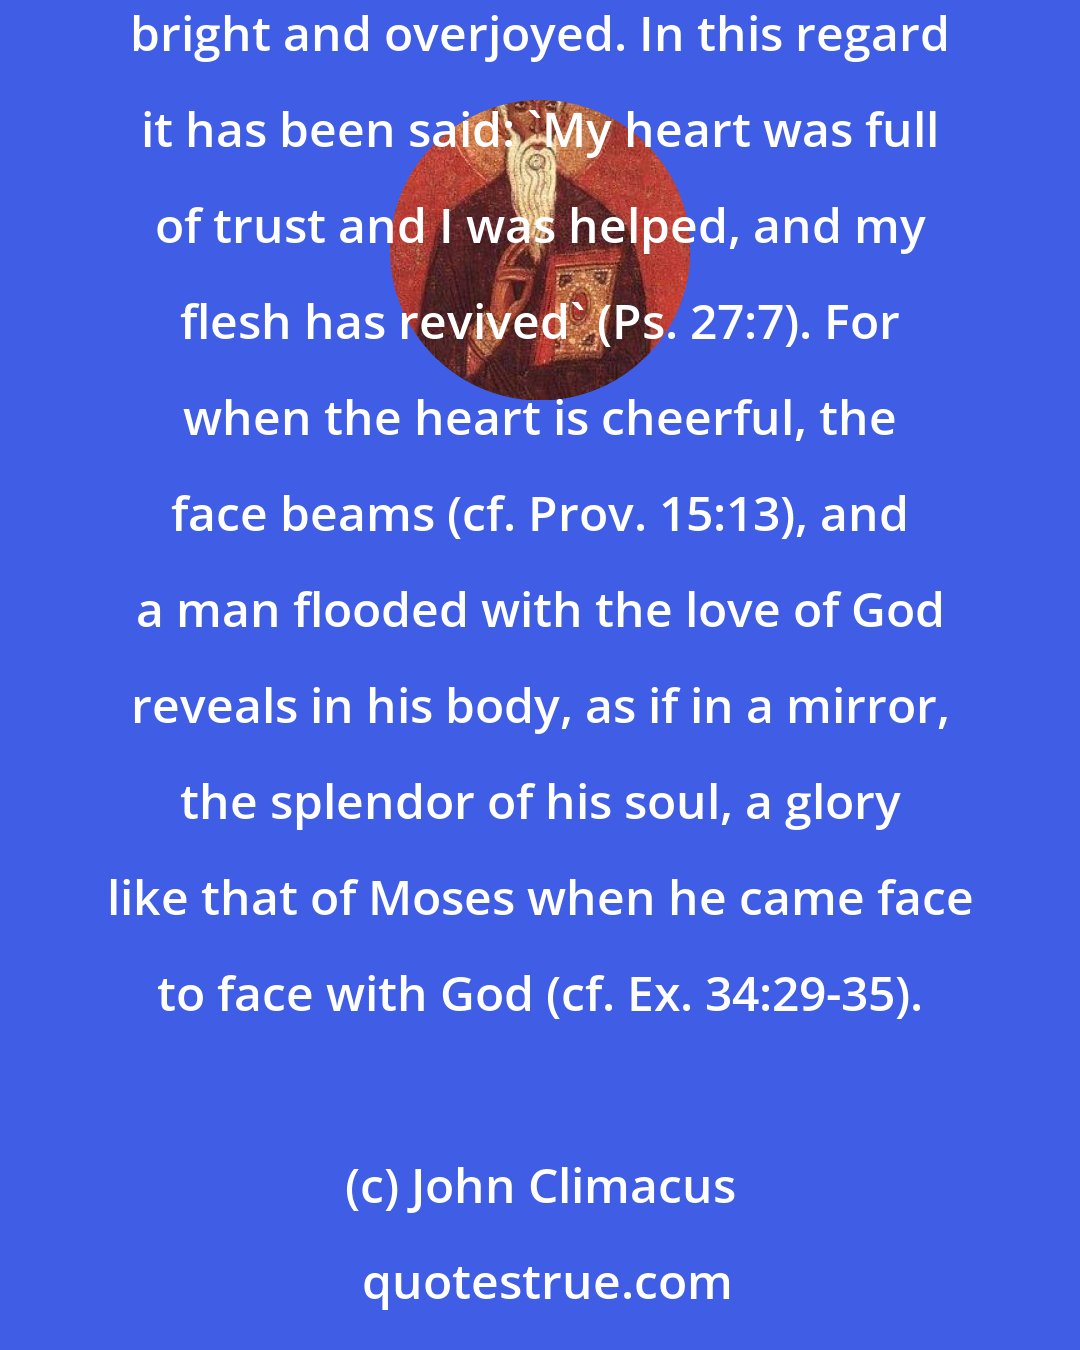 John Climacus: Holy love has a way of consuming some. This is what is meant by the one who said, 'You have ravished our hearts' (Sg. Of Sgs. 4:9). And it makes others bright and overjoyed. In this regard it has been said: 'My heart was full of trust and I was helped, and my flesh has revived' (Ps. 27:7). For when the heart is cheerful, the face beams (cf. Prov. 15:13), and a man flooded with the love of God reveals in his body, as if in a mirror, the splendor of his soul, a glory like that of Moses when he came face to face with God (cf. Ex. 34:29-35).